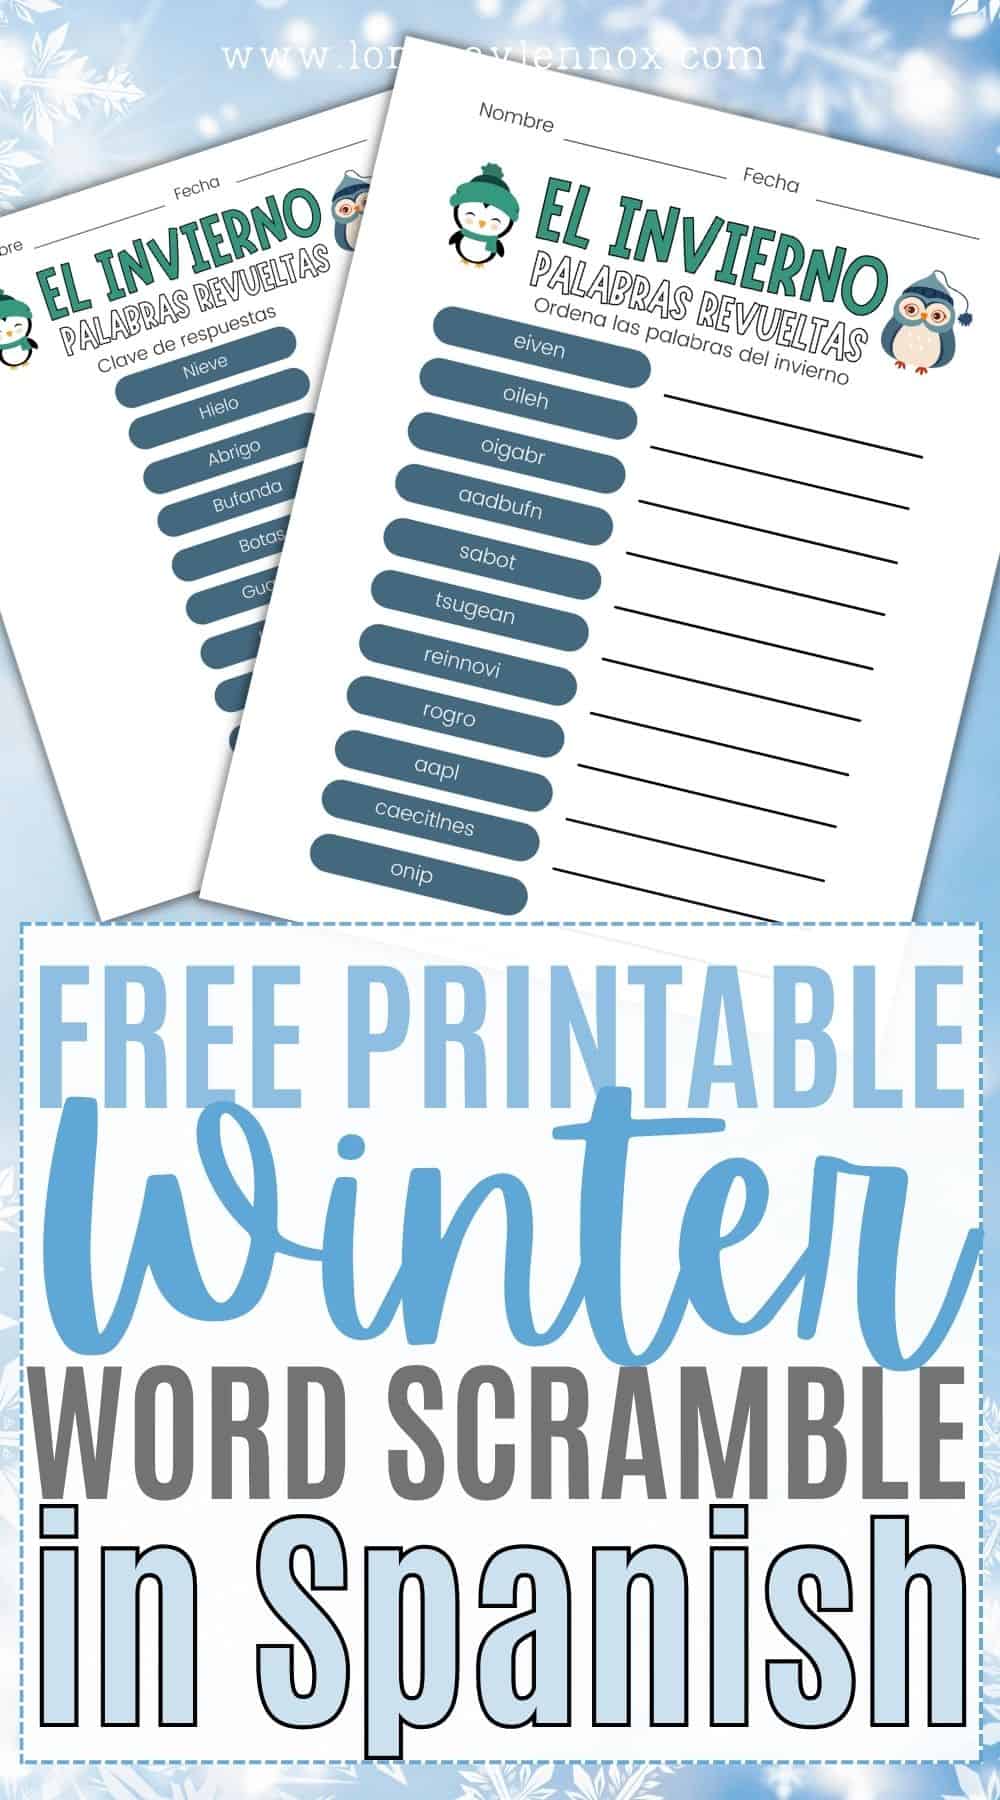 "❄️ Unlock the winter wonderland of Spanish vocabulary with our fun and educational word scramble printable! 🇪🇸 Challenge your mind and enhance your language skills as you unscramble words like nieve, hielo, abrigo, and more. Perfect for language learners and kids, this printable adds a festive twist to language exploration. Get ready to embrace the snowy season with a touch of linguistic magic! ❄️📚 #SpanishLearning #WinterWords #LanguageFun #WordScramble #EducationalPrintable"